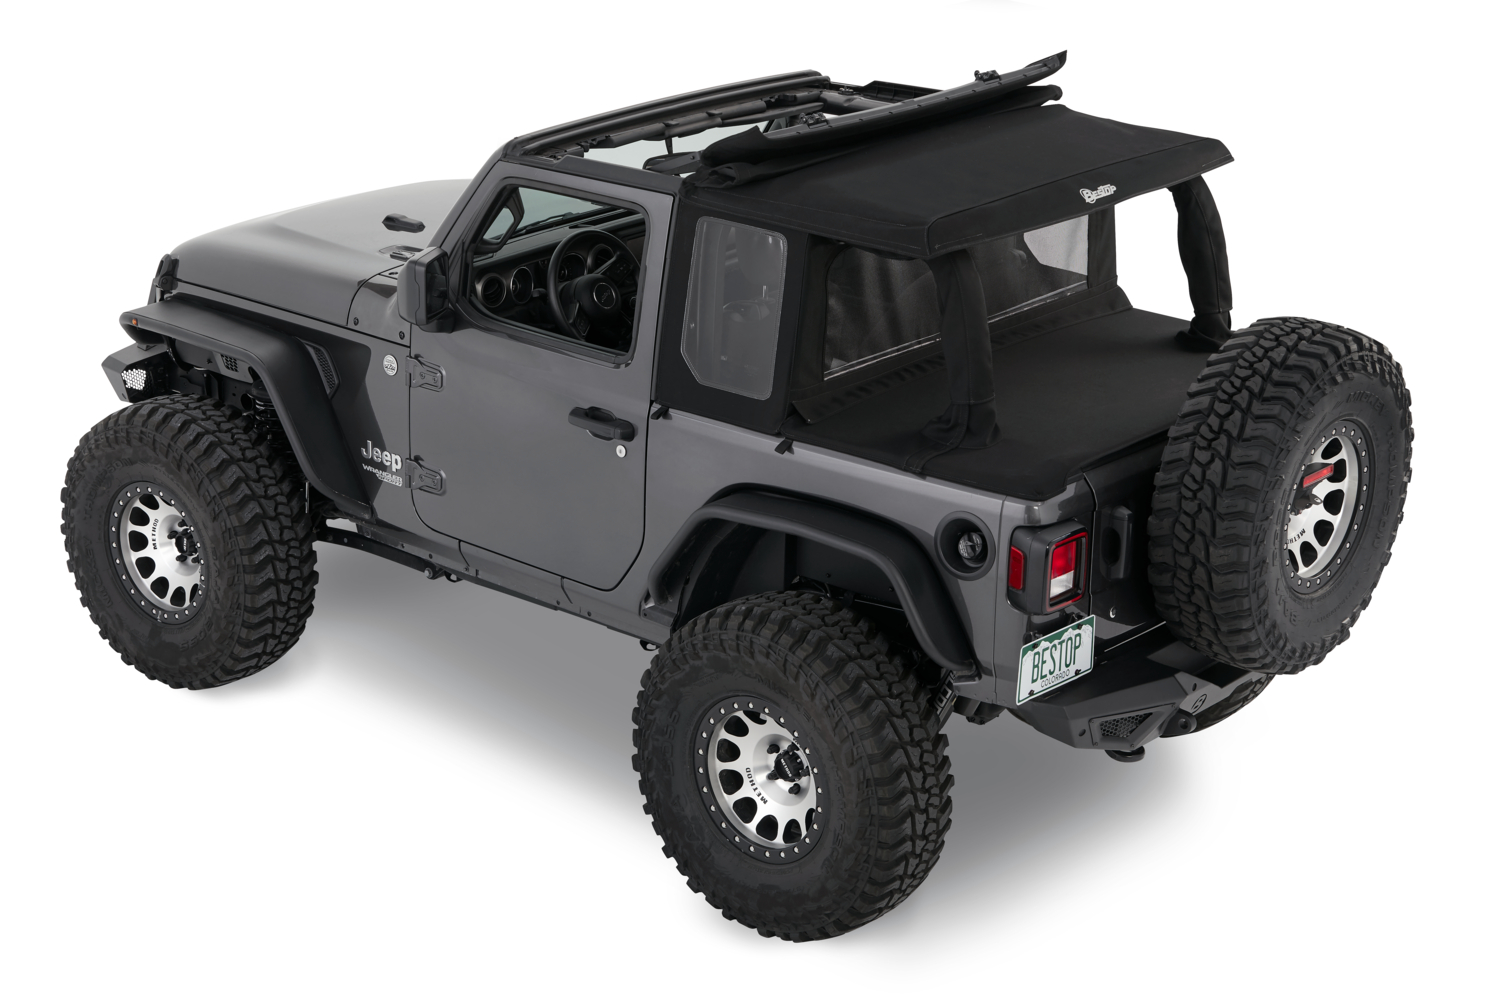 Bestop - 80101-17 - Halftop Accessory Kit Fits select: 2018-2019,2021 JEEP WRANGLER UNLIMITED - image 1 of 2